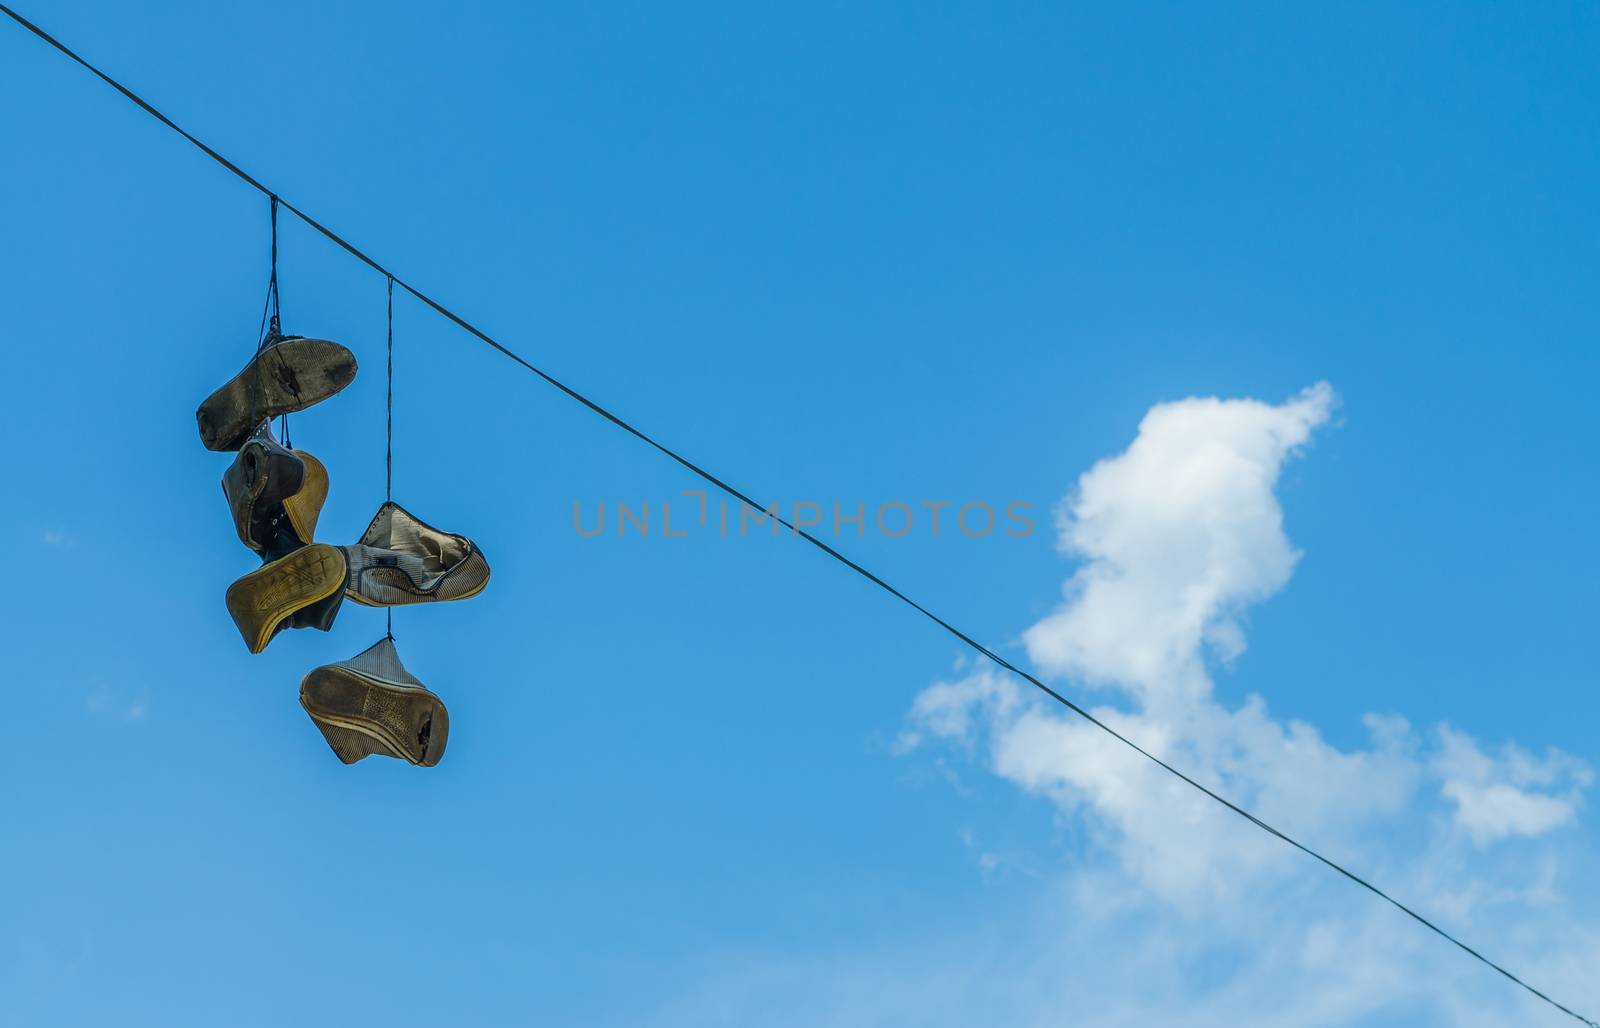 shoes on the power line by Andreua